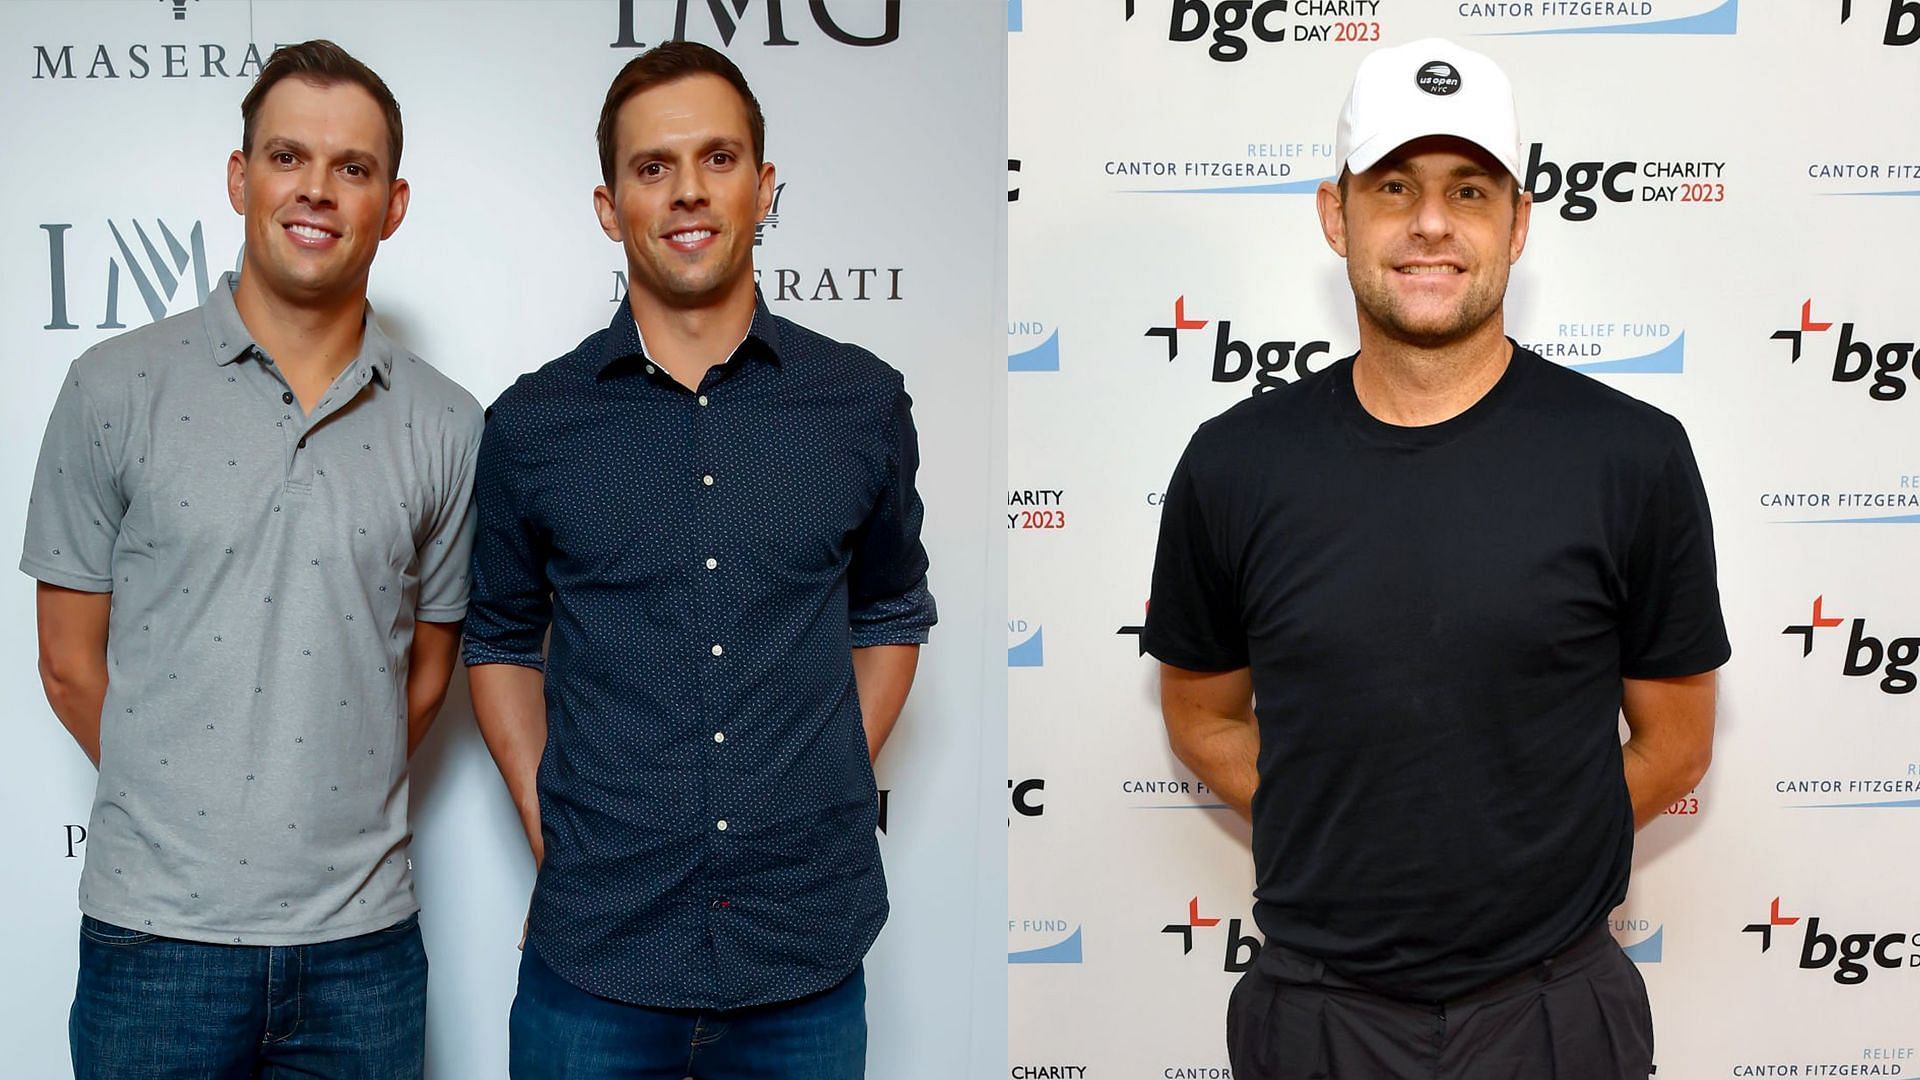 Bob Bryan told Andy Roddick how he used his Olympic gold medal to attract women for brother Mike